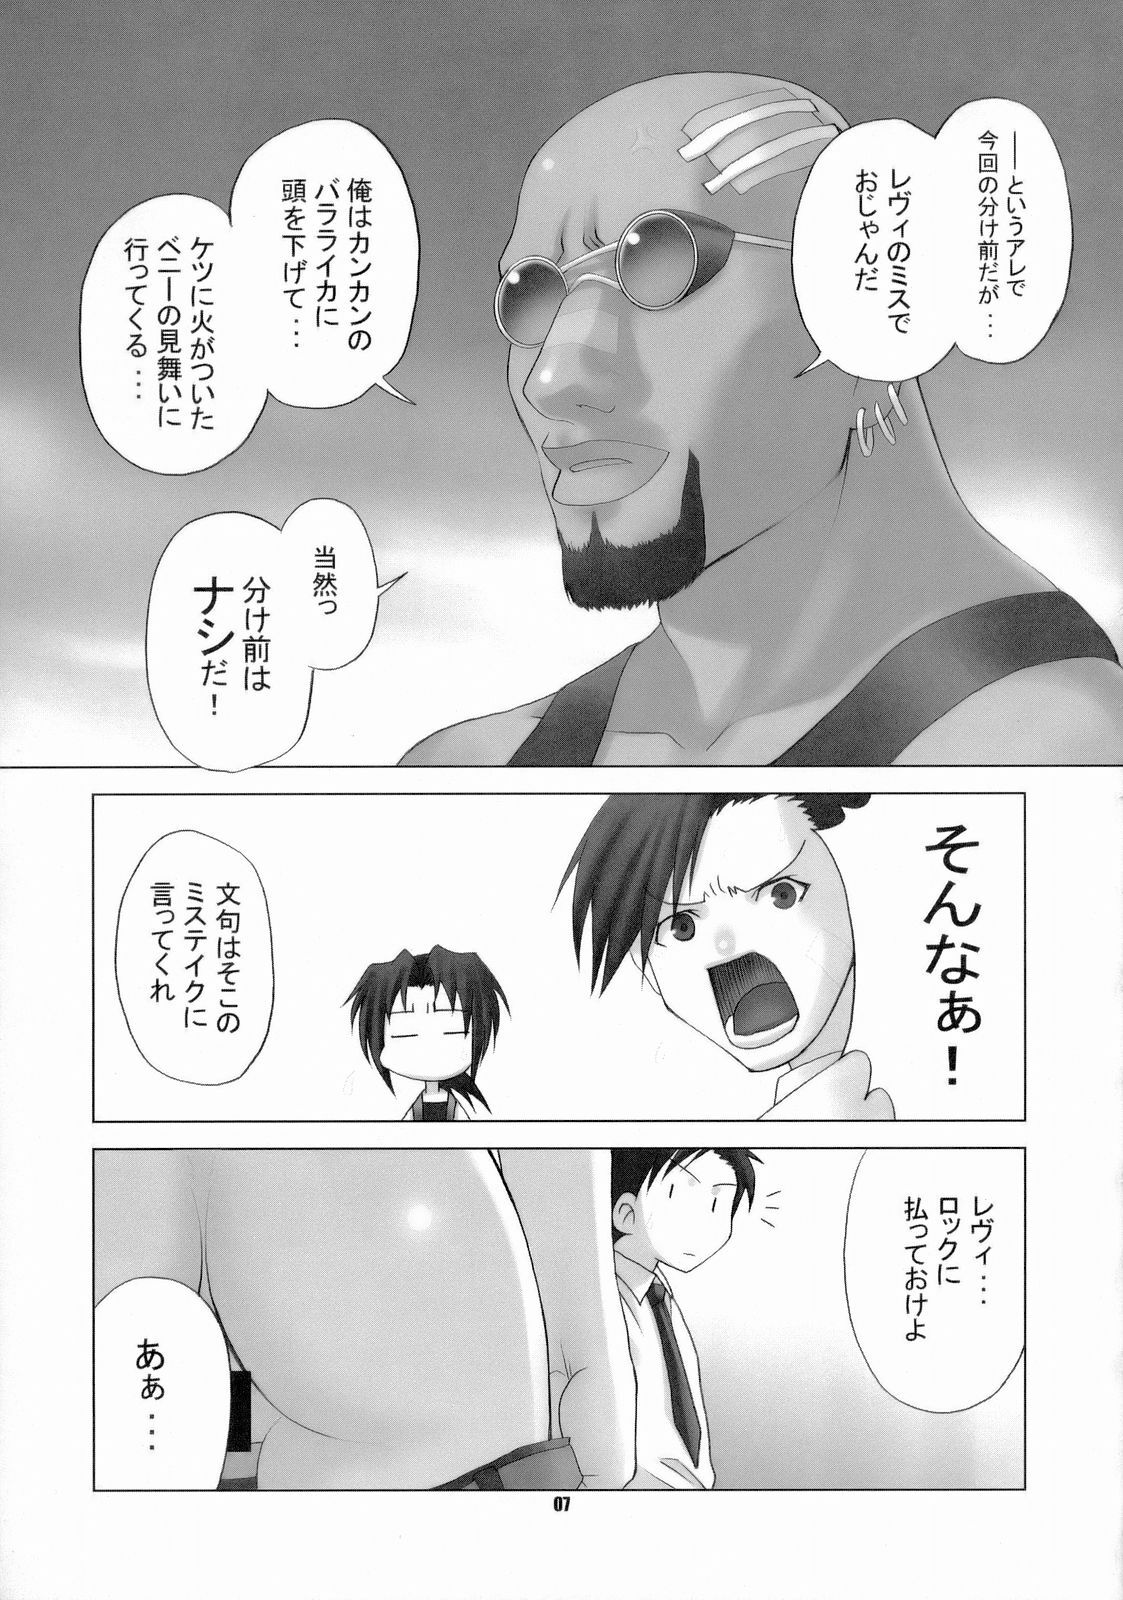 (CR36) [Celluloid-Acme (Chiba Toshirou)] Spitfire (Black Lagoon) page 8 full